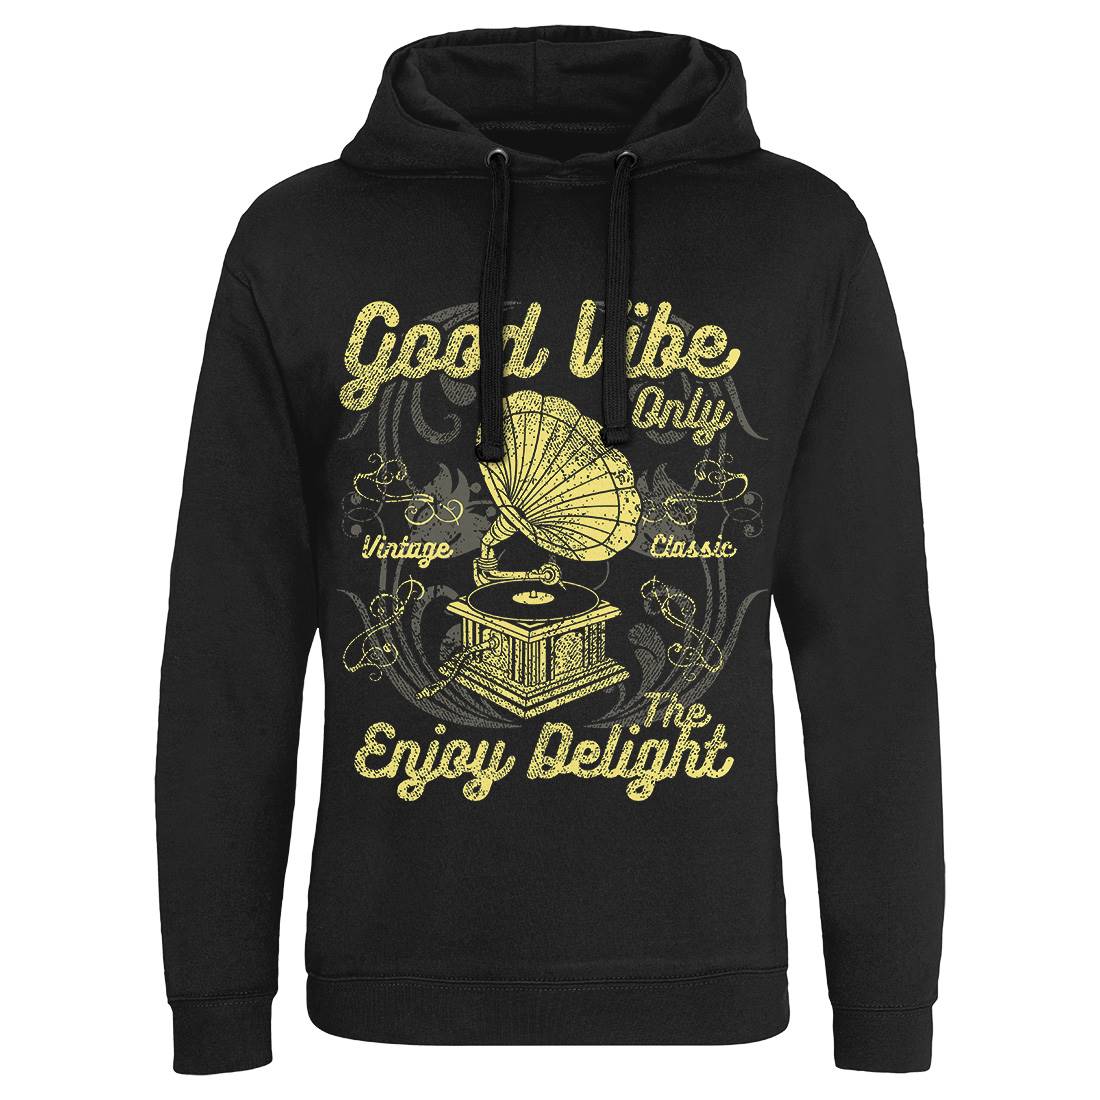 Good Vibe Only Mens Hoodie Without Pocket Music A059